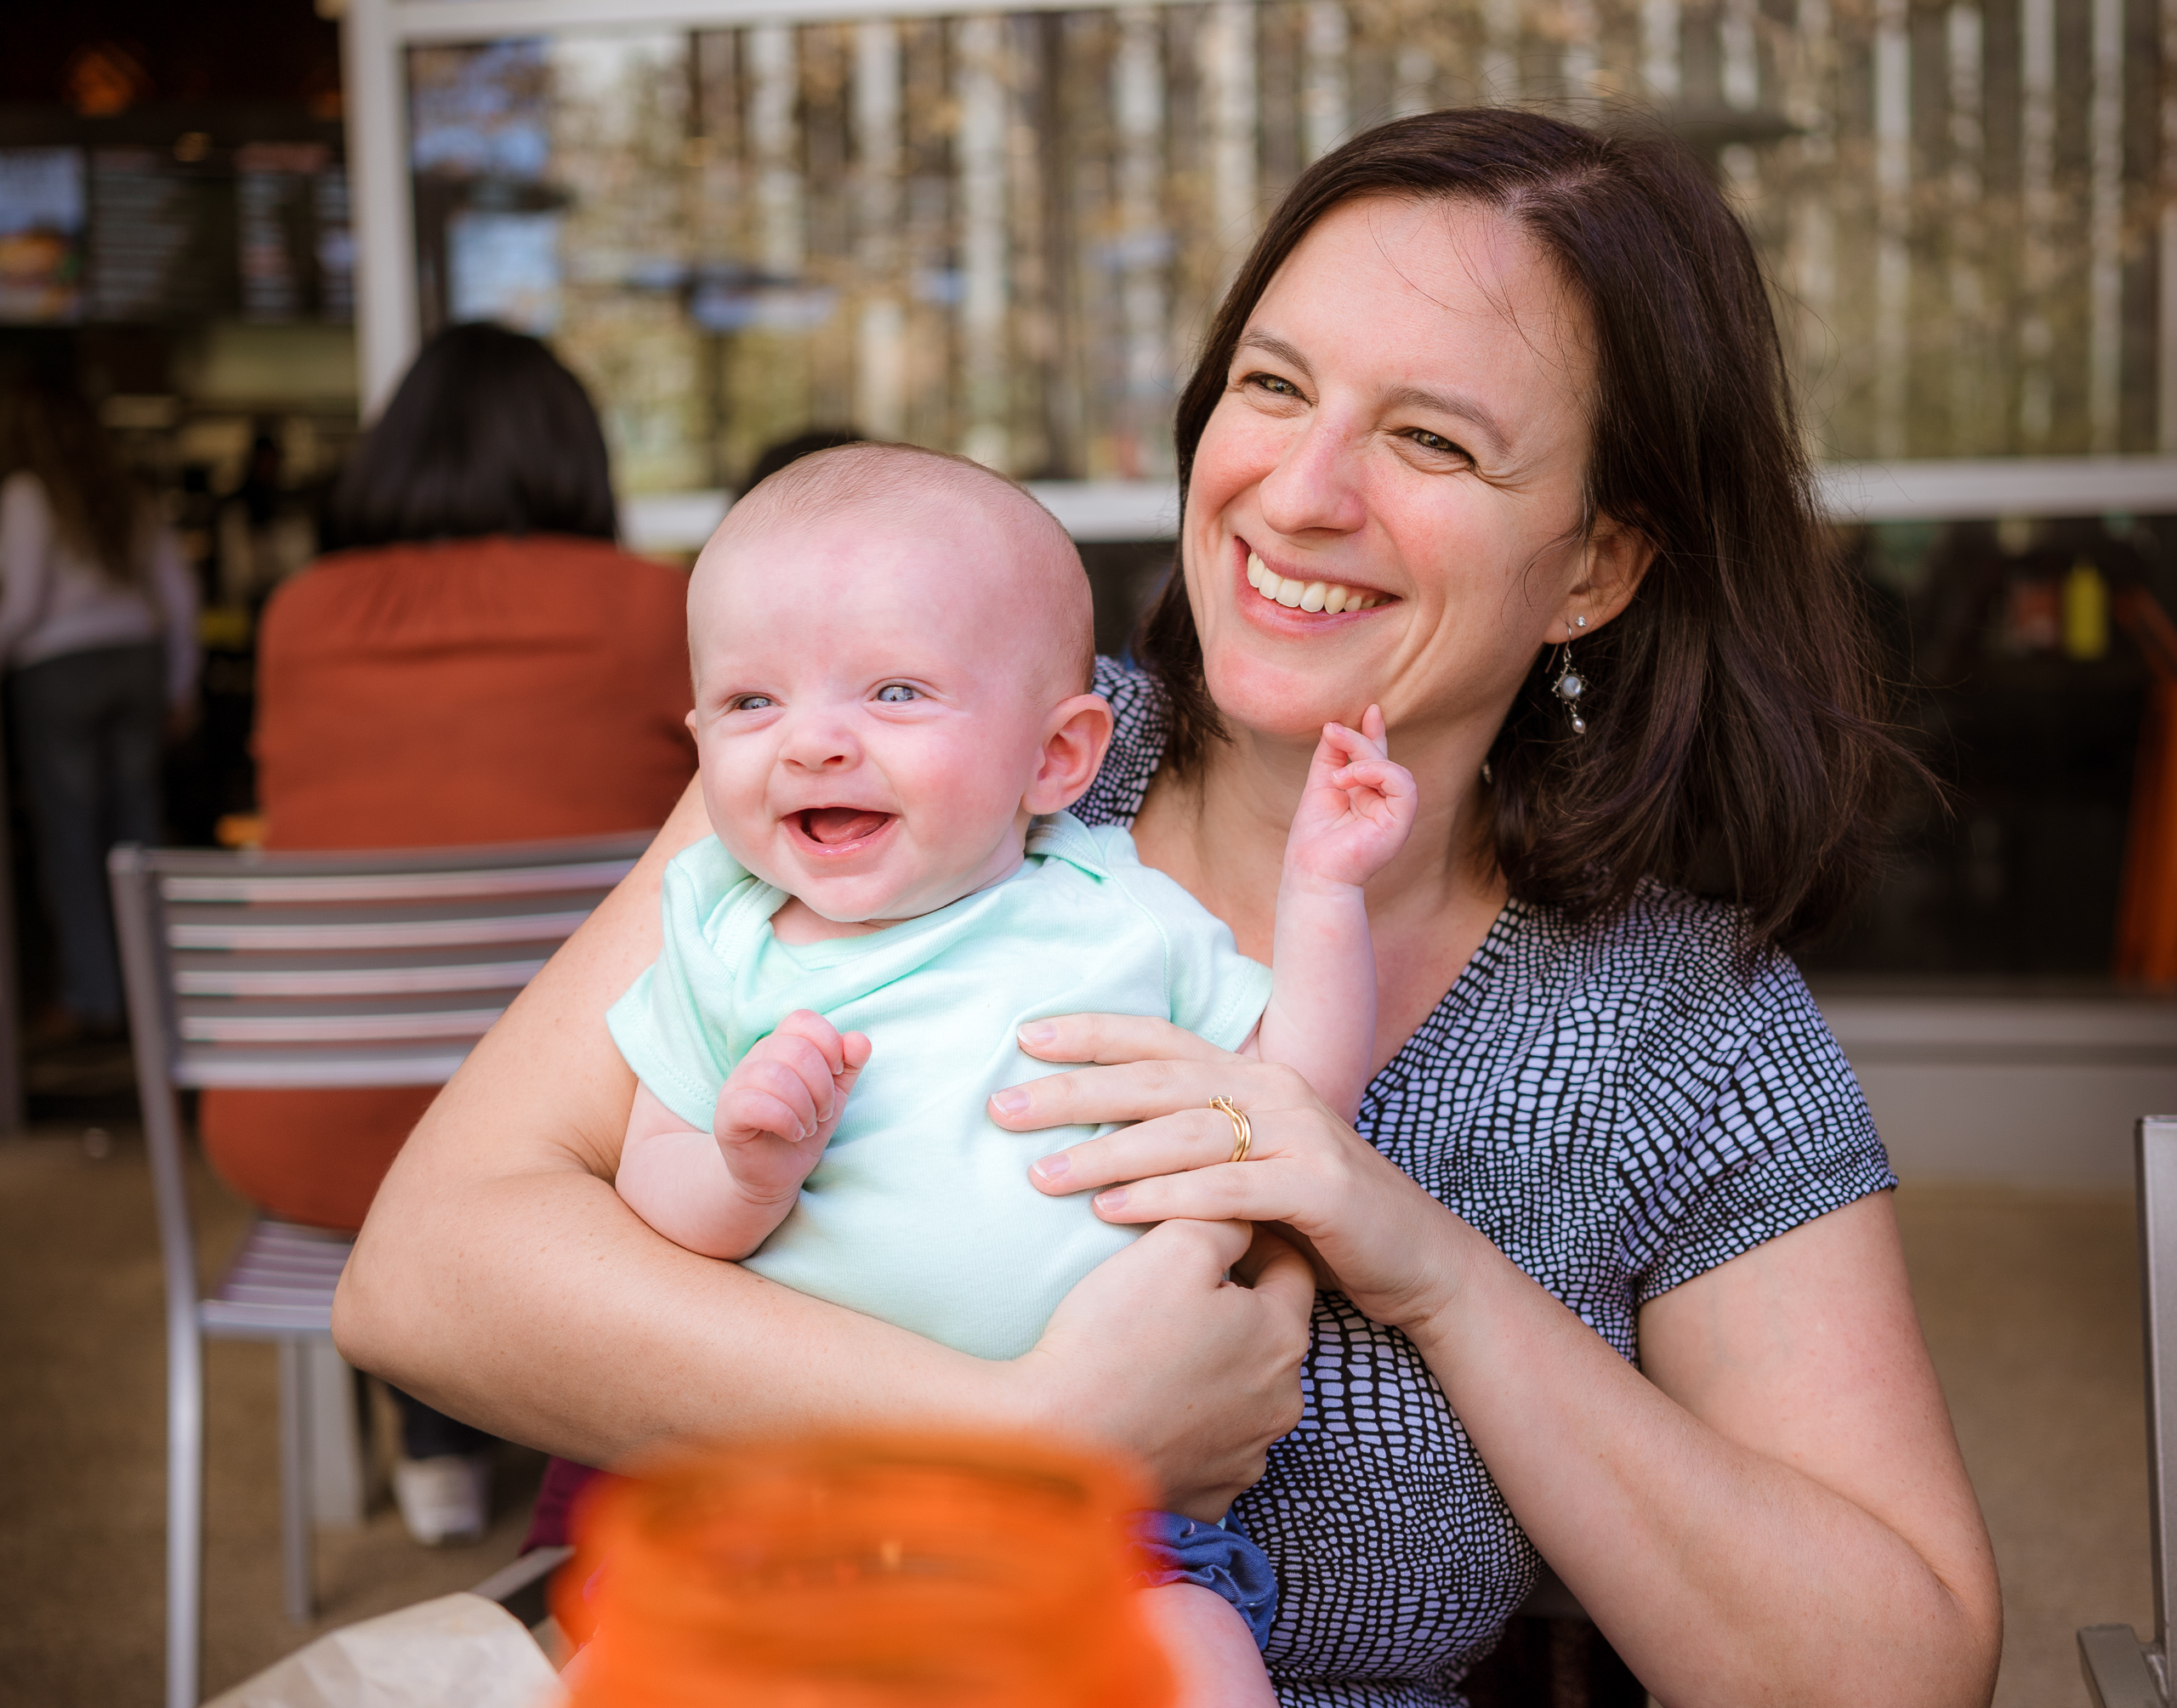 Los Angeles Photo Gang organizer Aurelia Dumont holds her new baby while having lunch in Century City, California